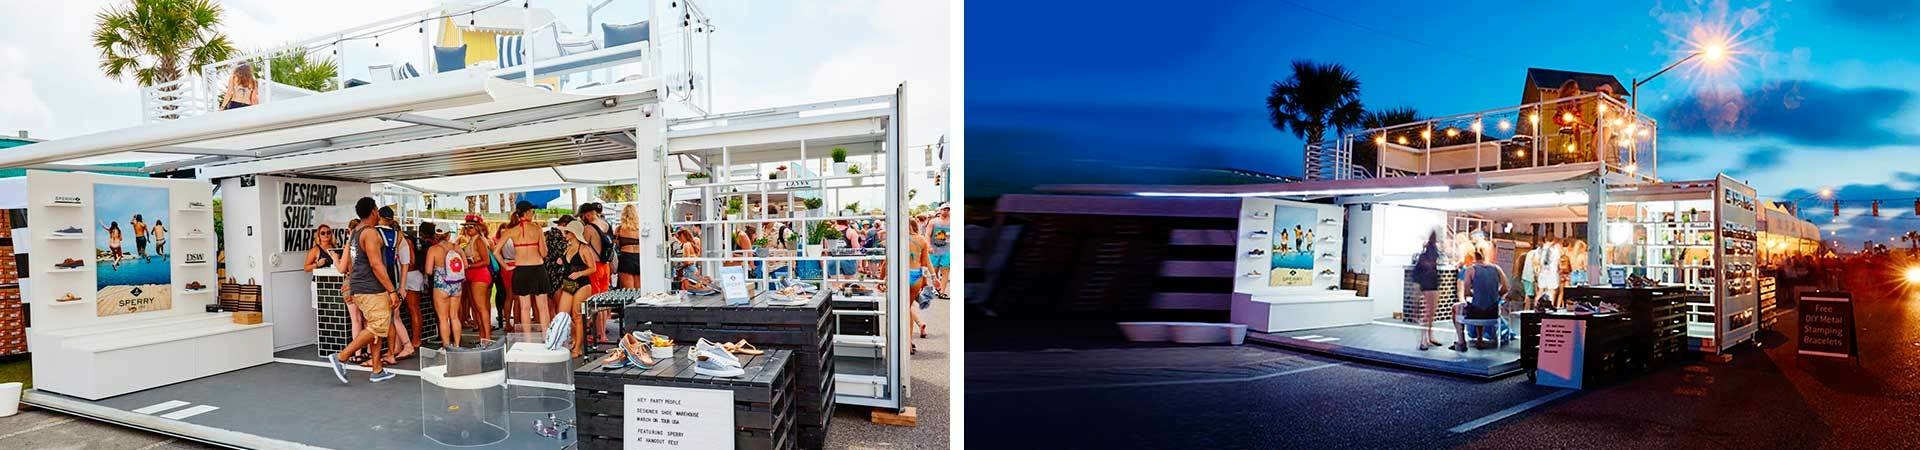 Box Pop shipping containers for retail sponsors at outdoor events.